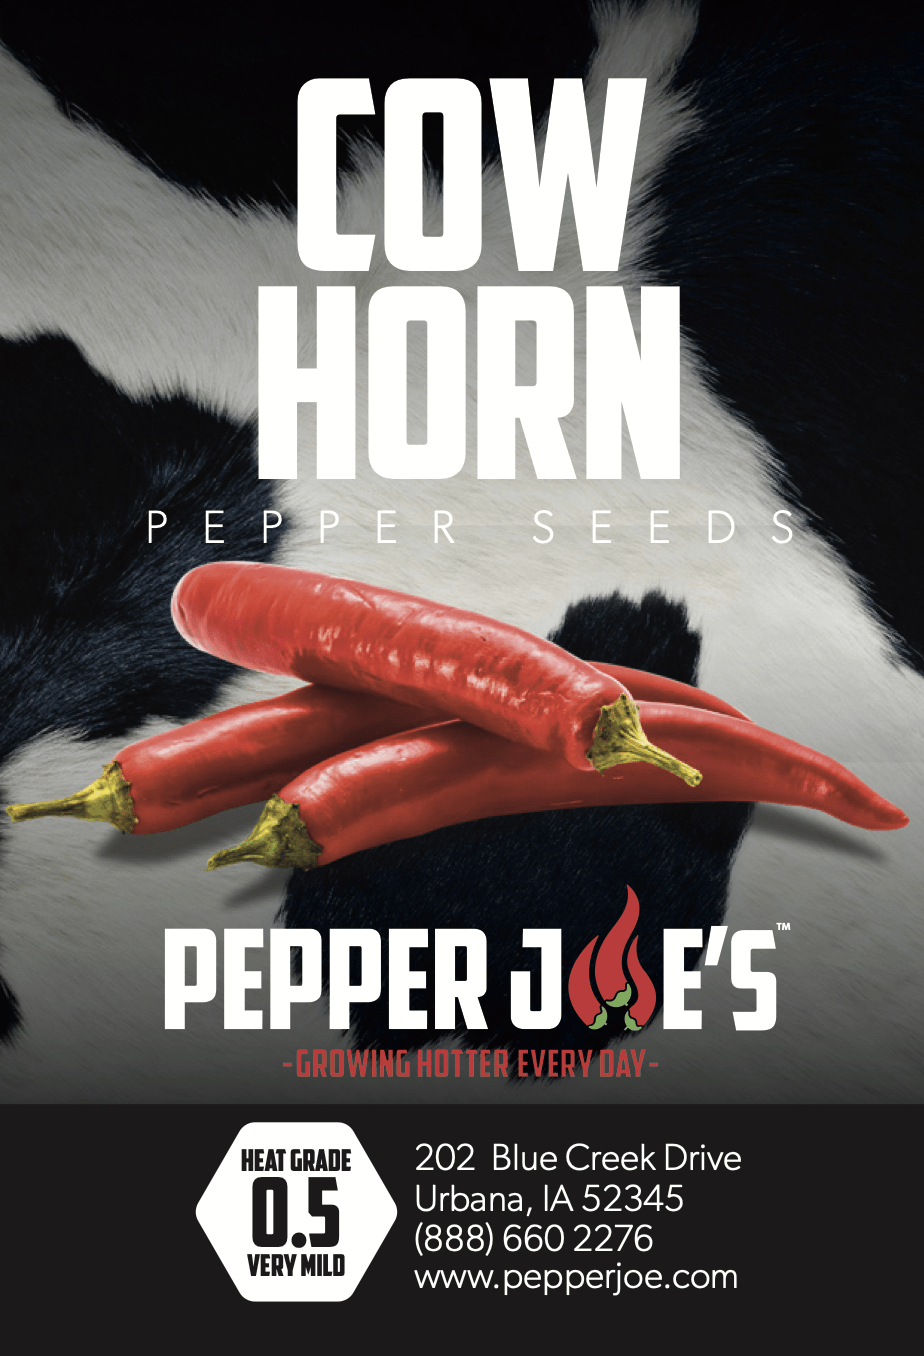 Pepper Joe's cow horn chili - seed label